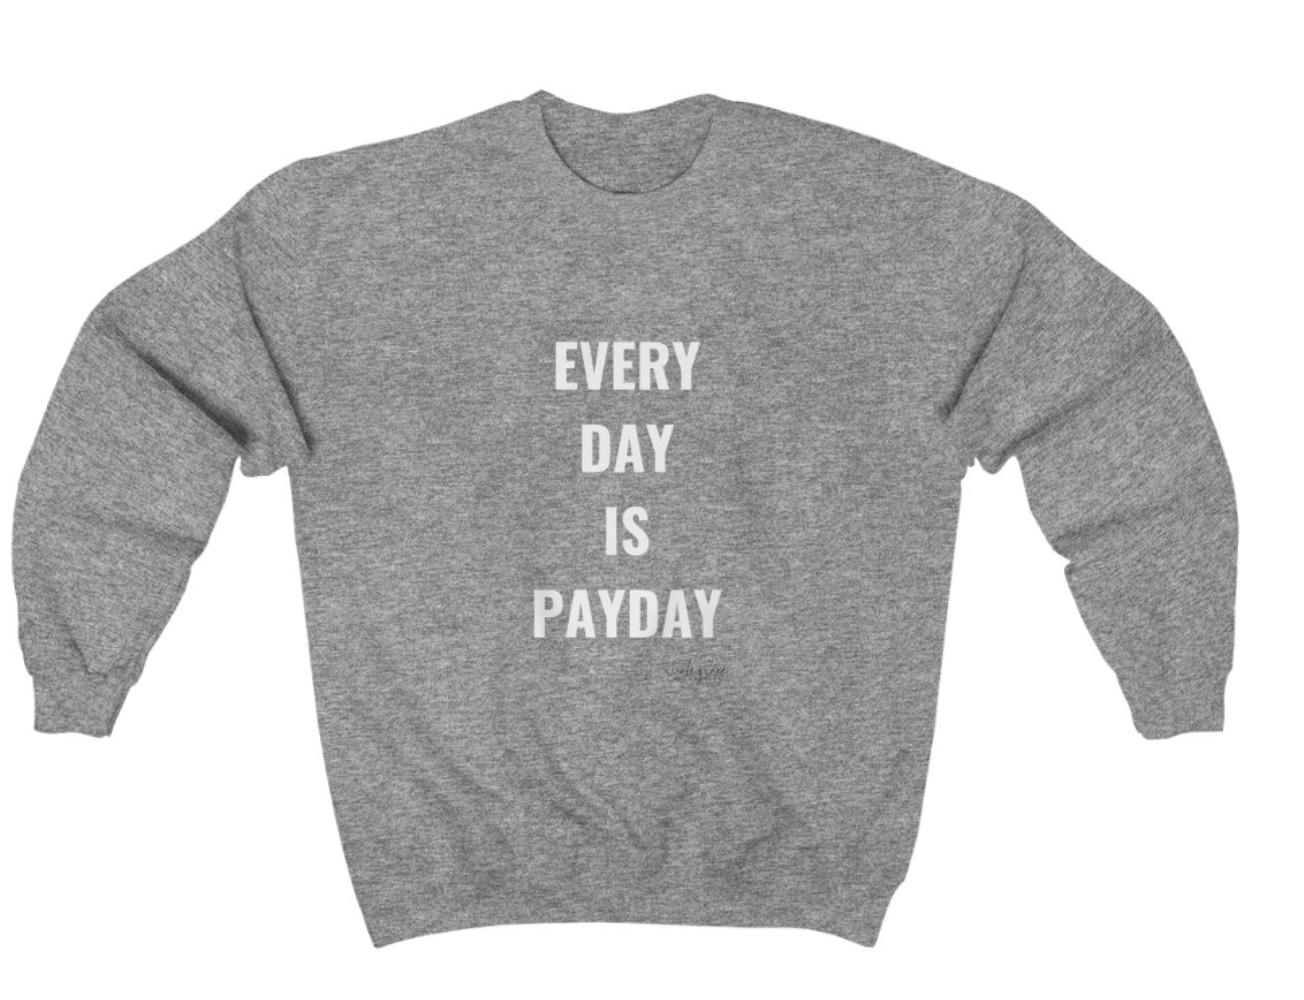 Every Day is Payday Sweatshirt